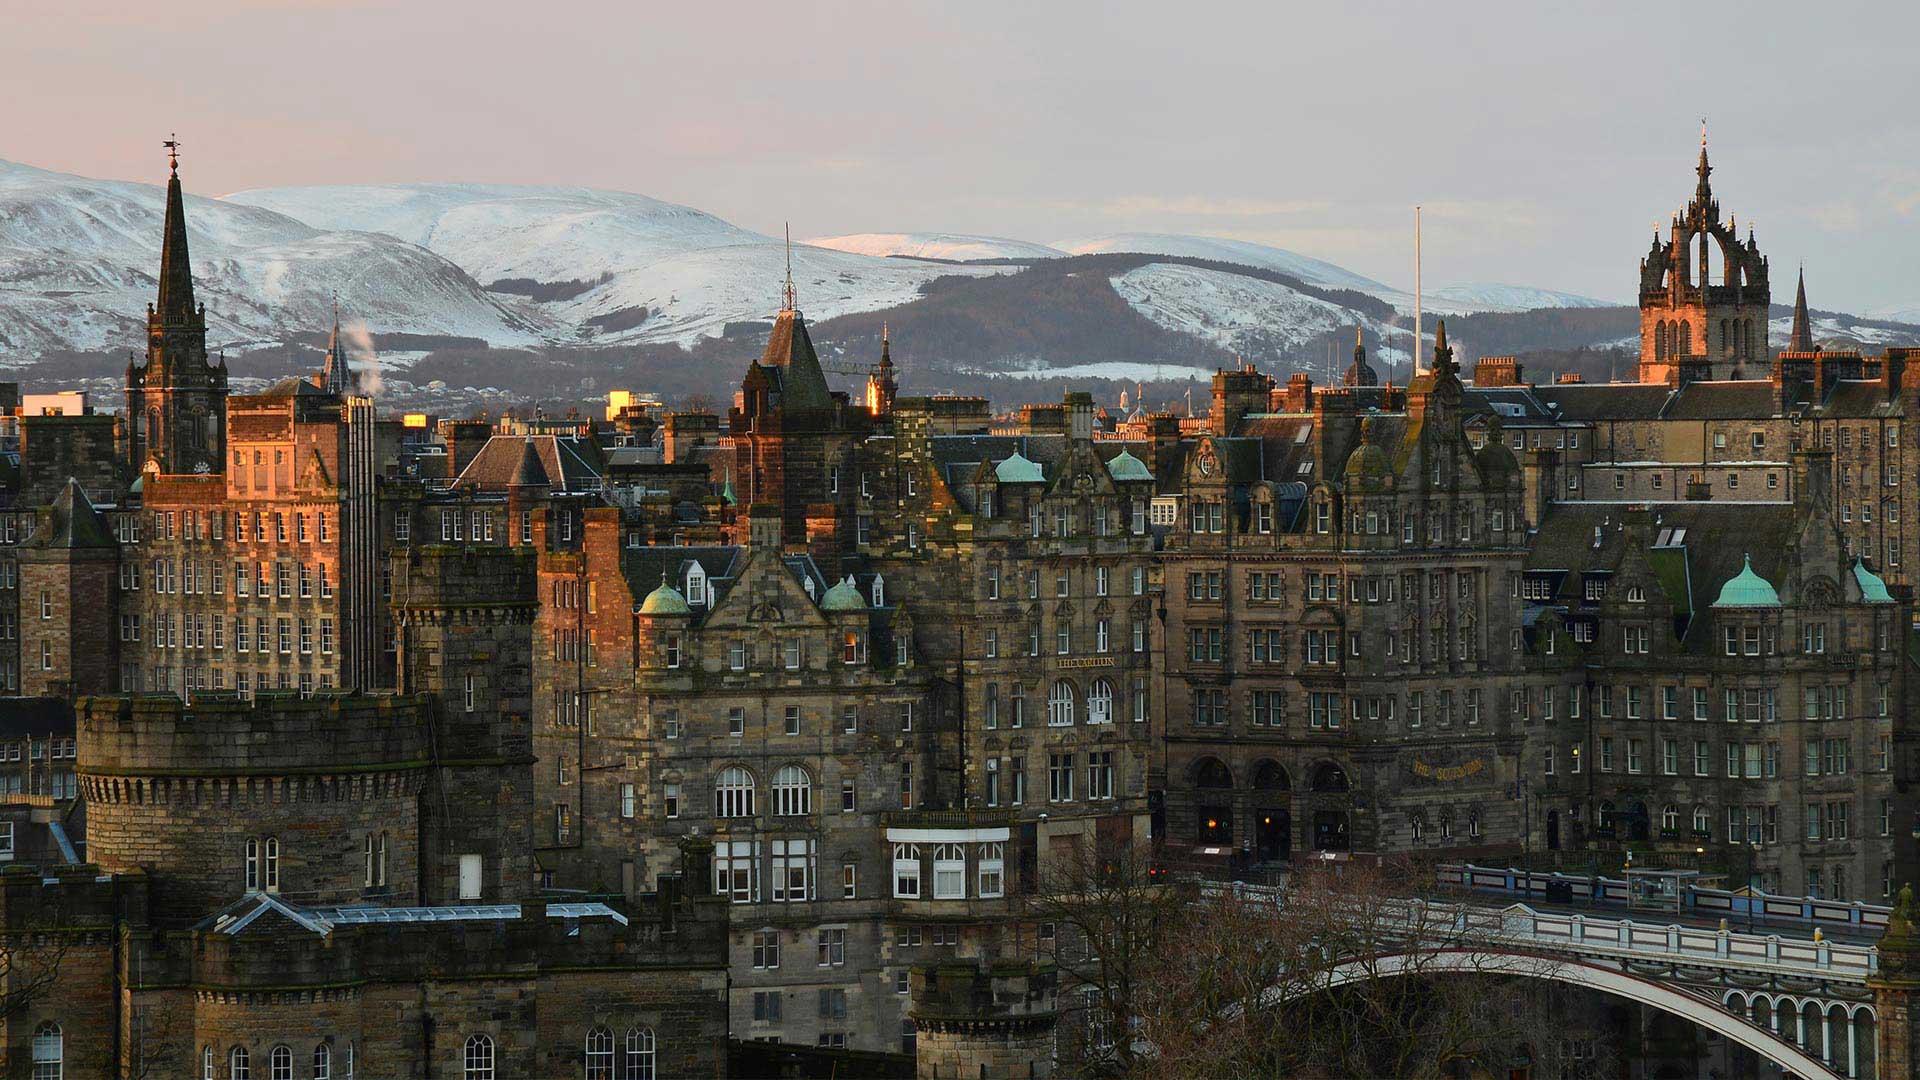 where to visit in scotland in december